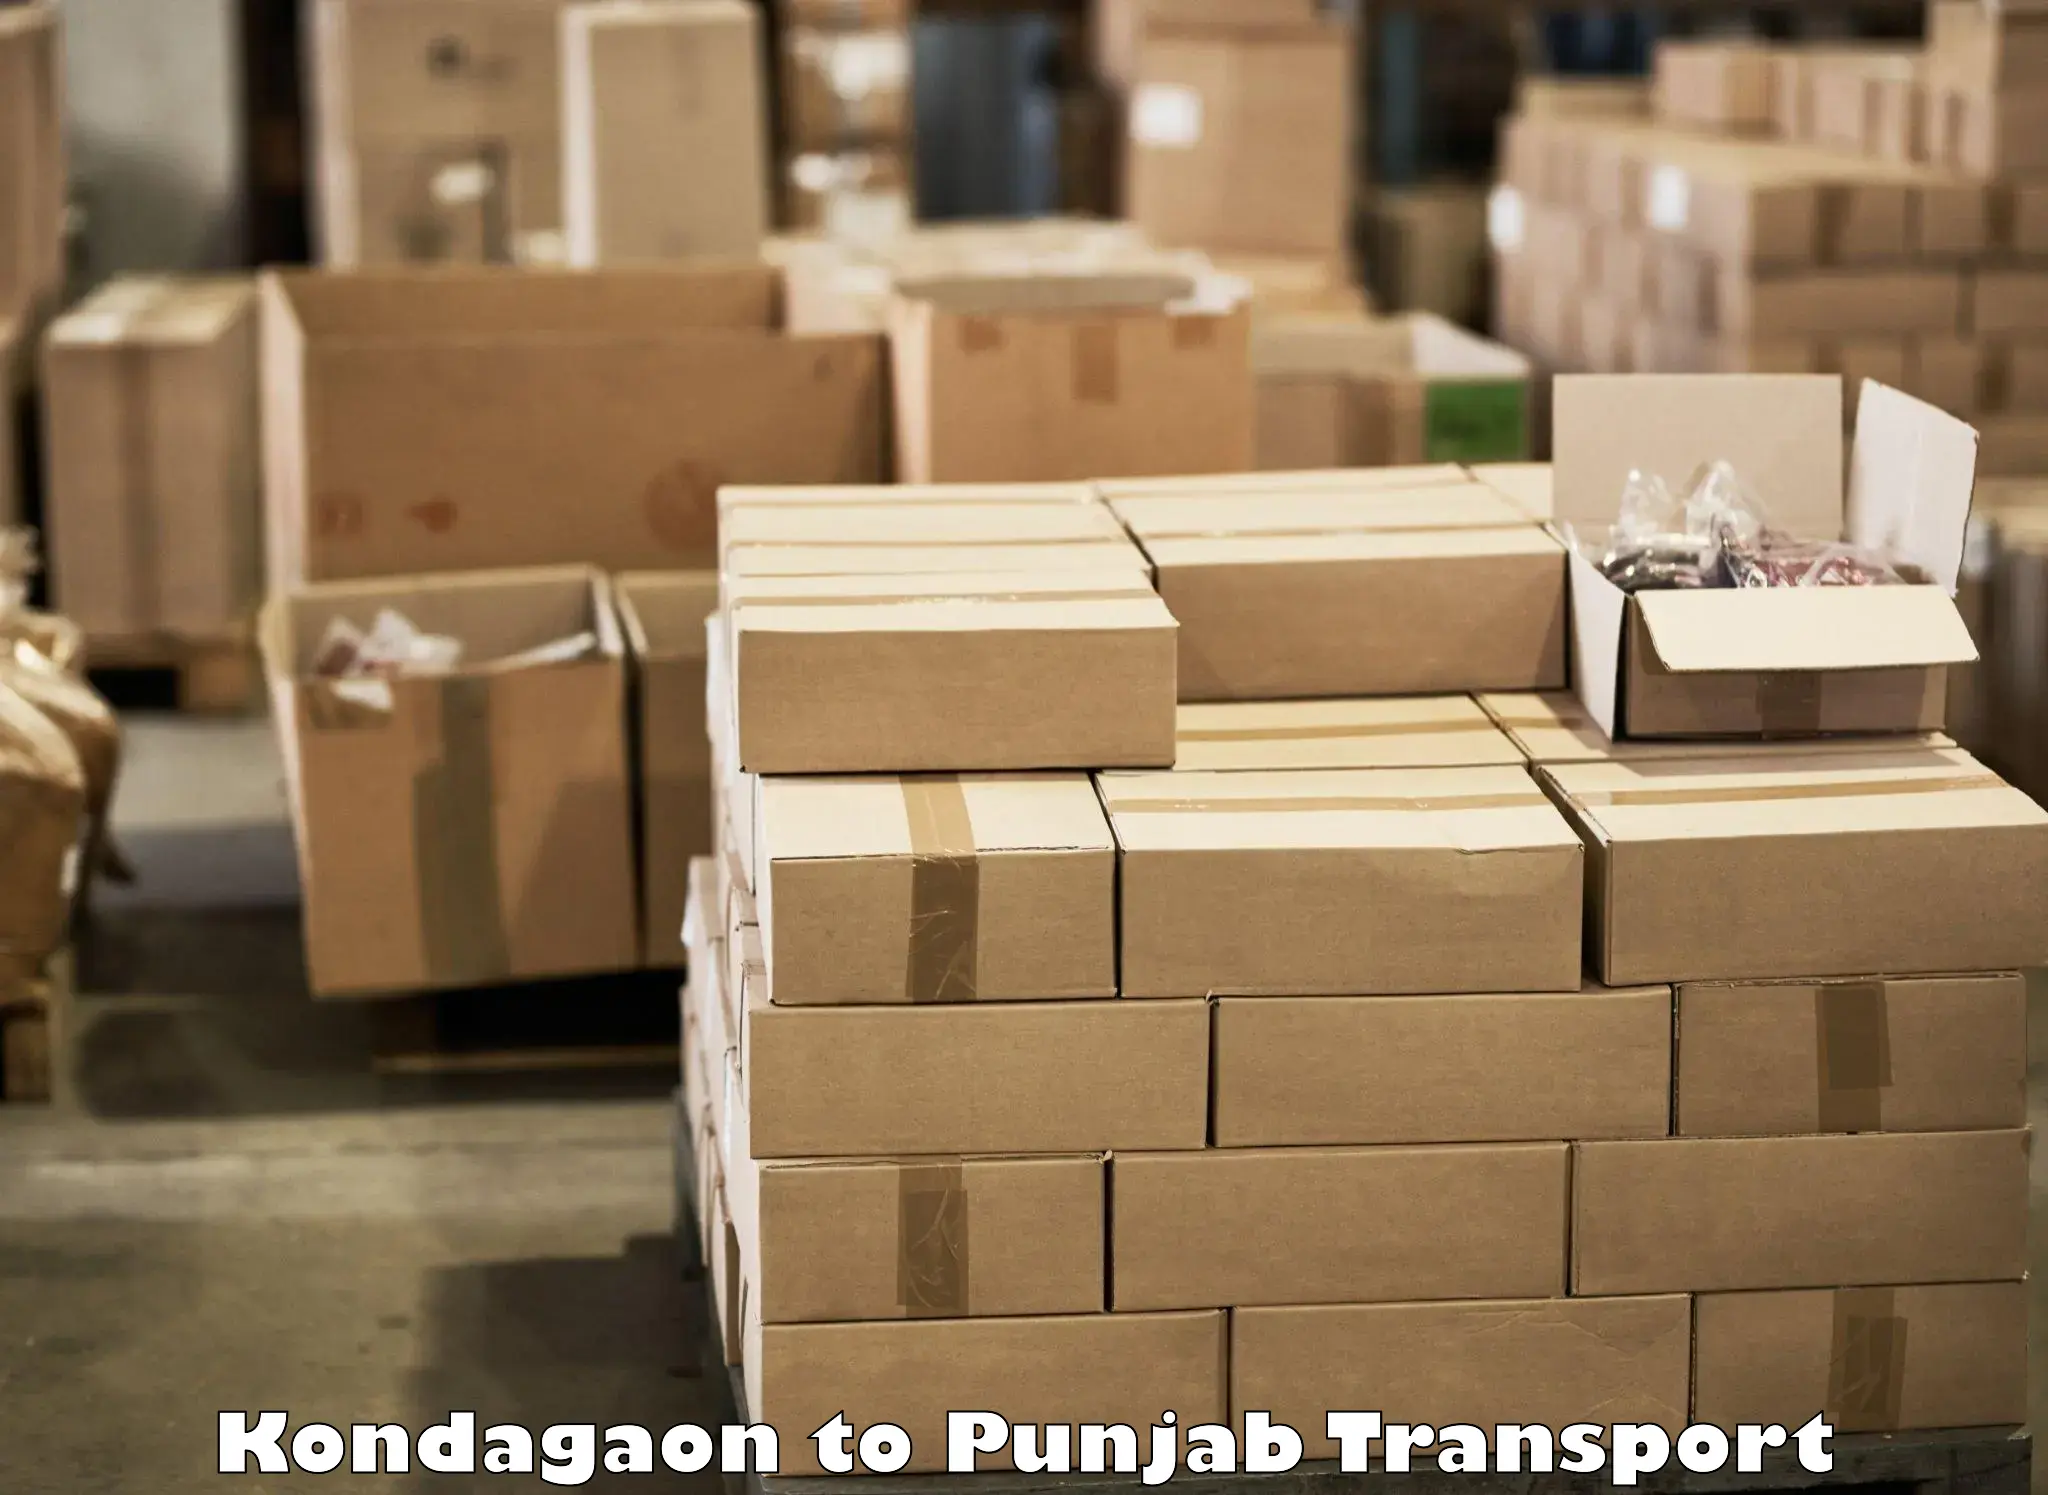 Transport bike from one state to another Kondagaon to Dinanagar